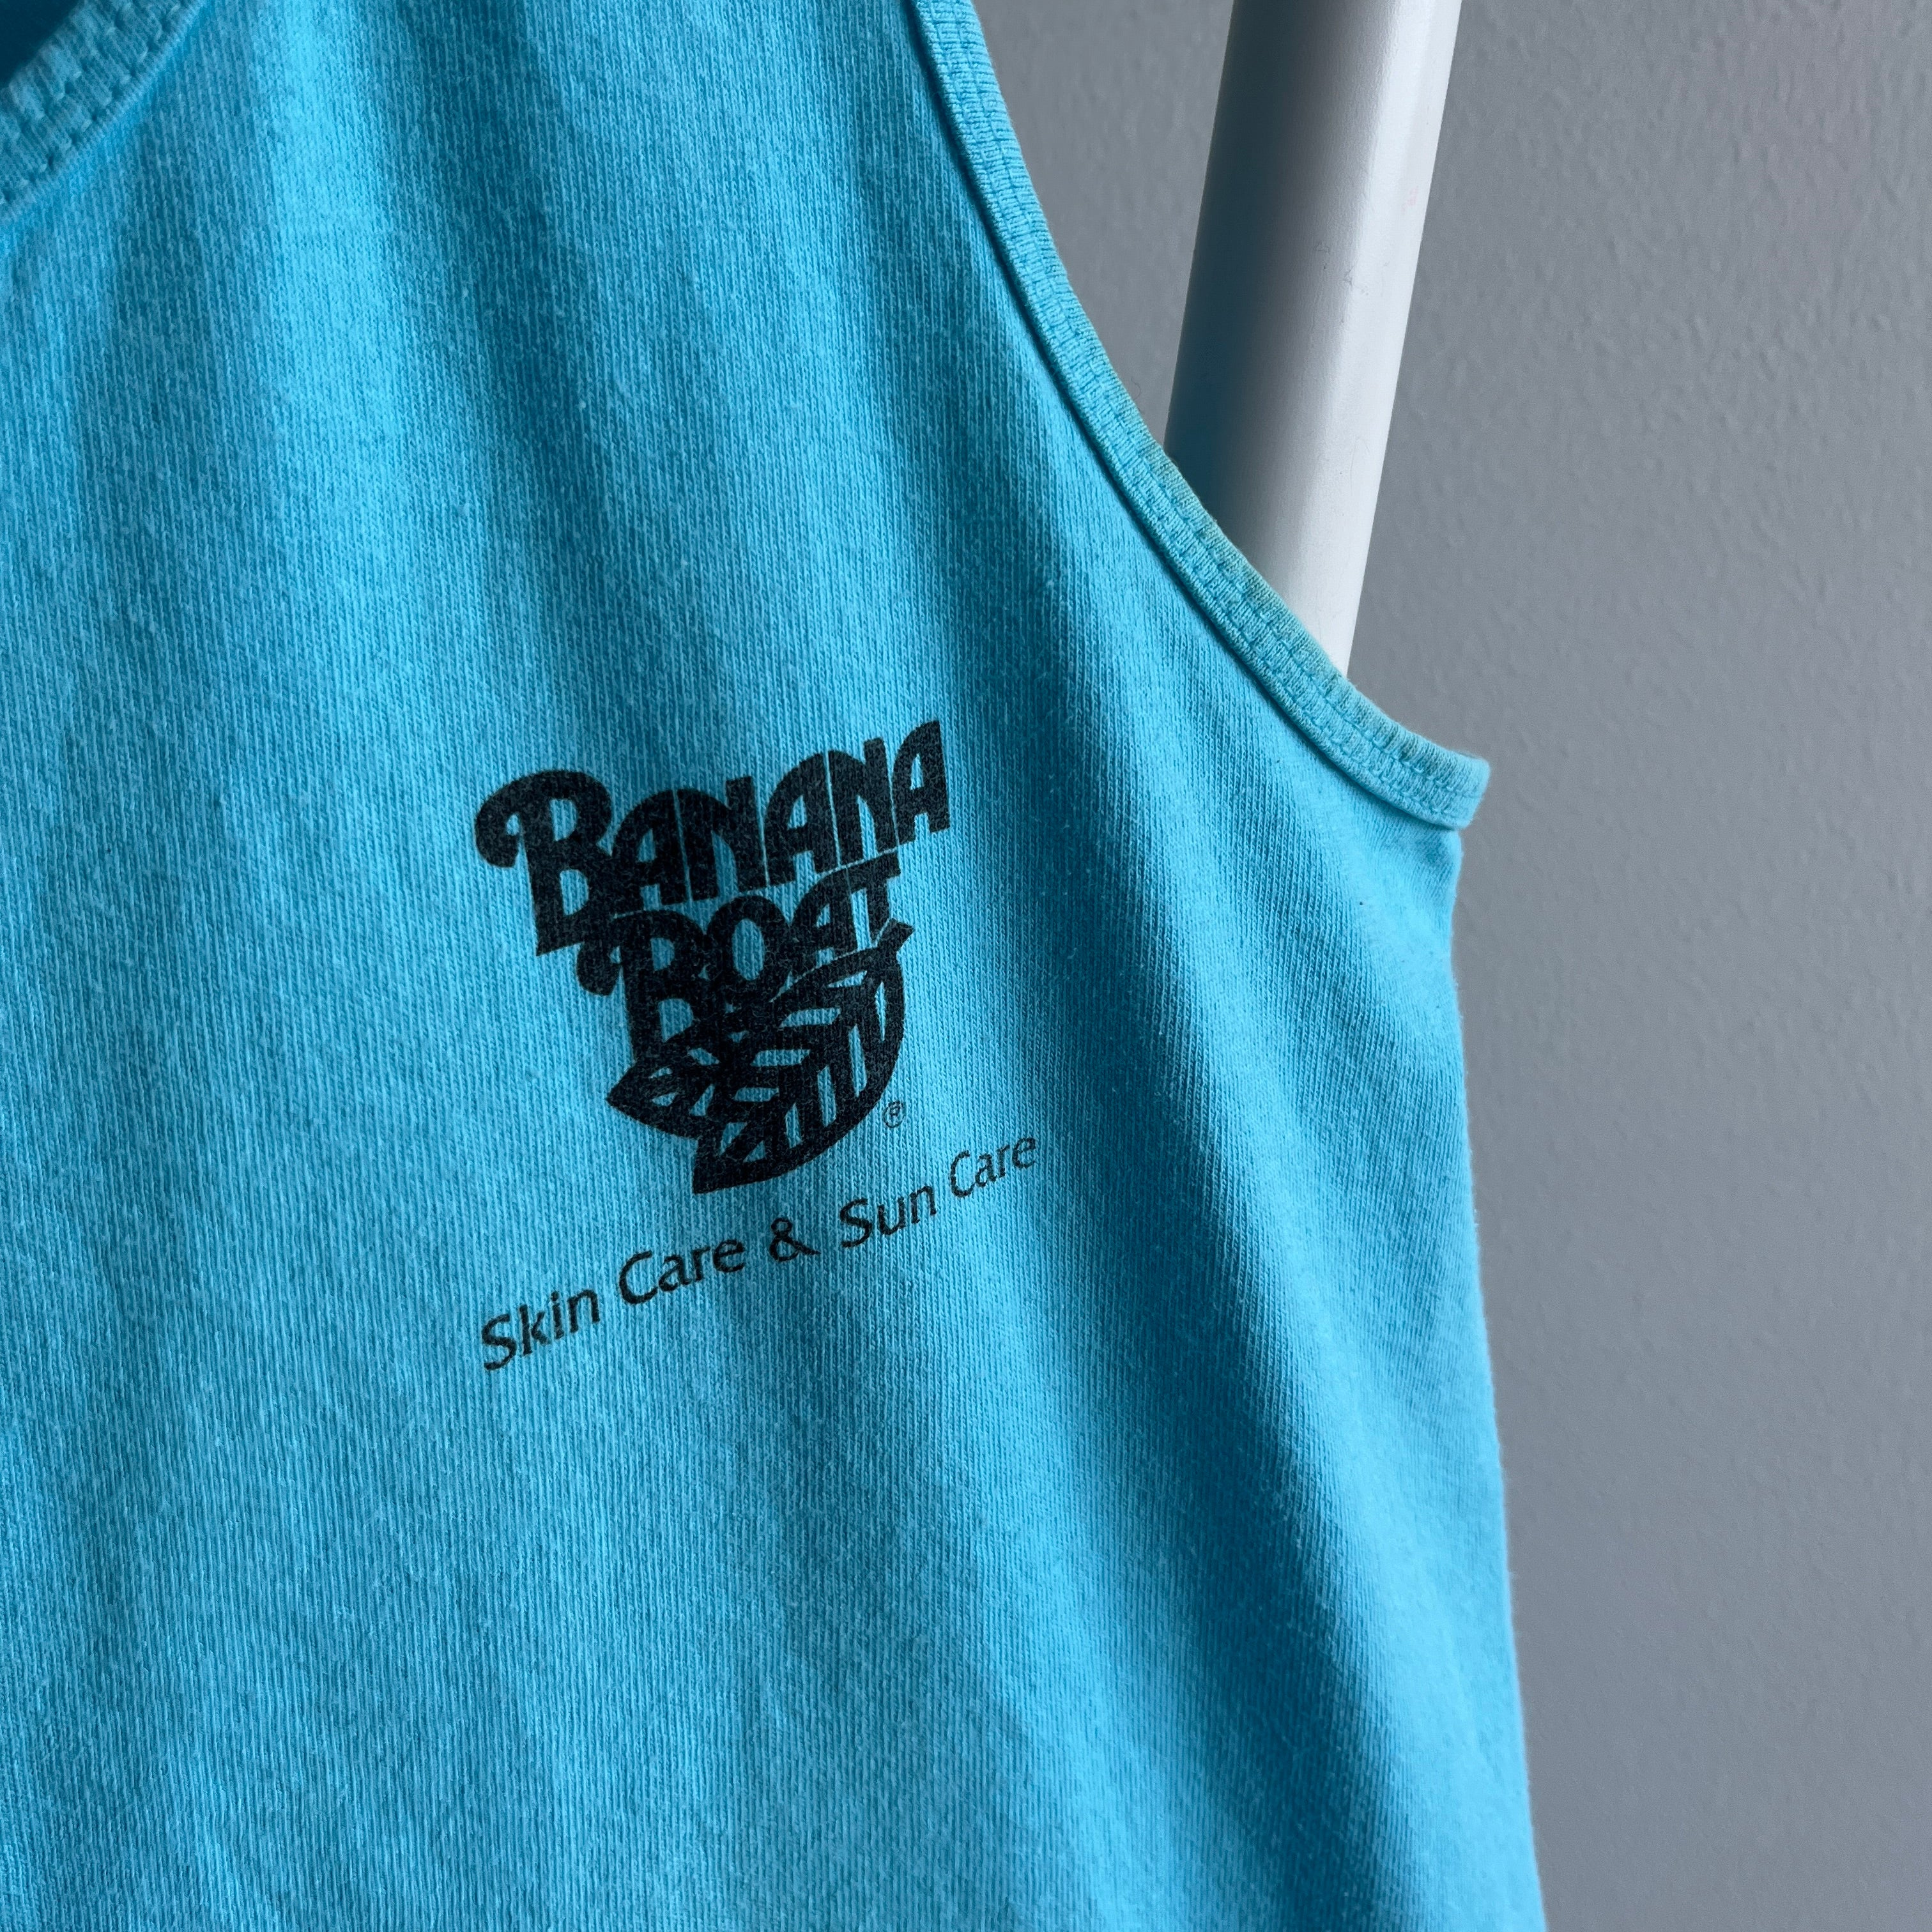 1992 Banana Boat Front and Backside (The Back is Everything!) Tank Top